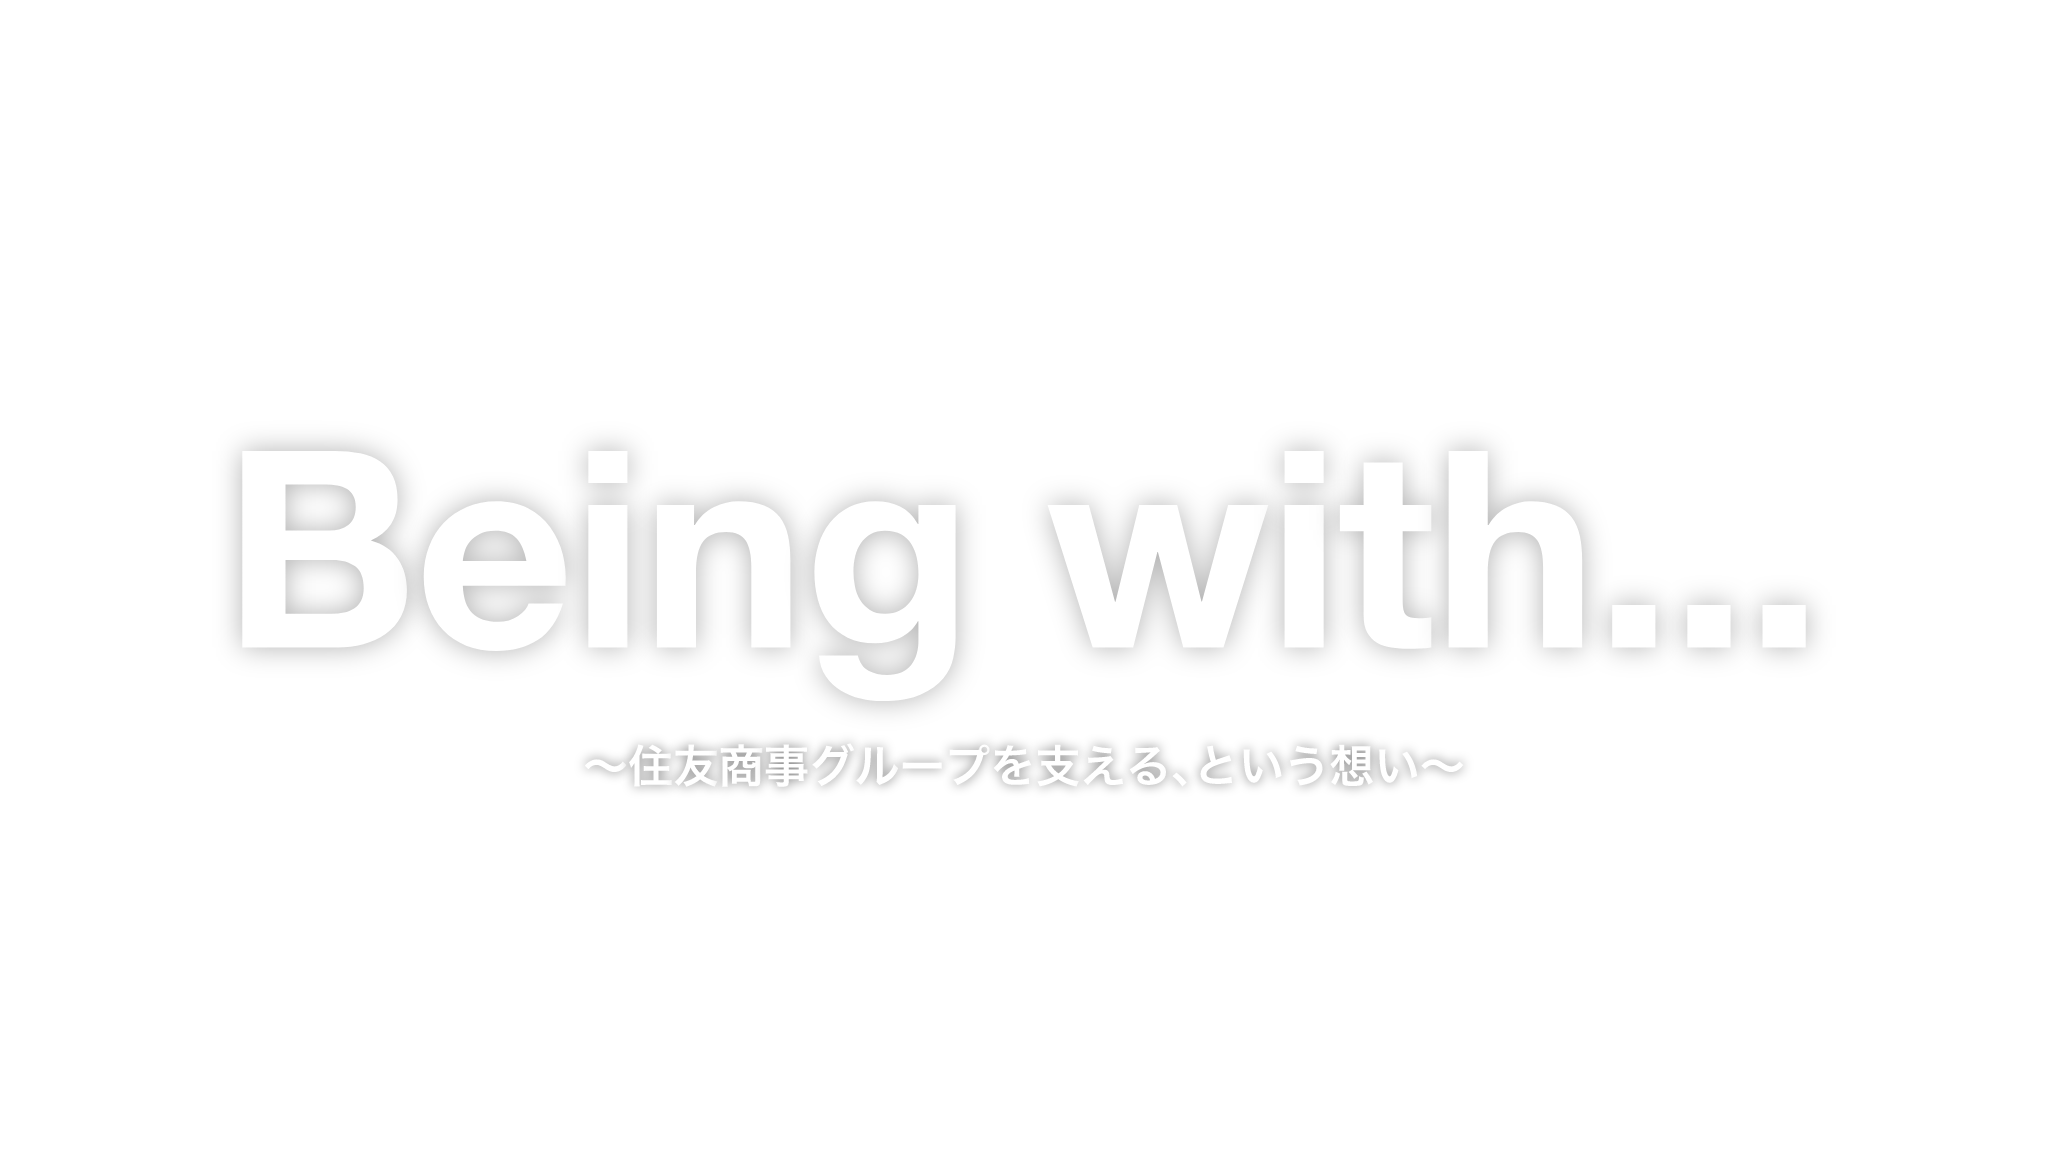 Being with... 住友商事グループを支える、という想い